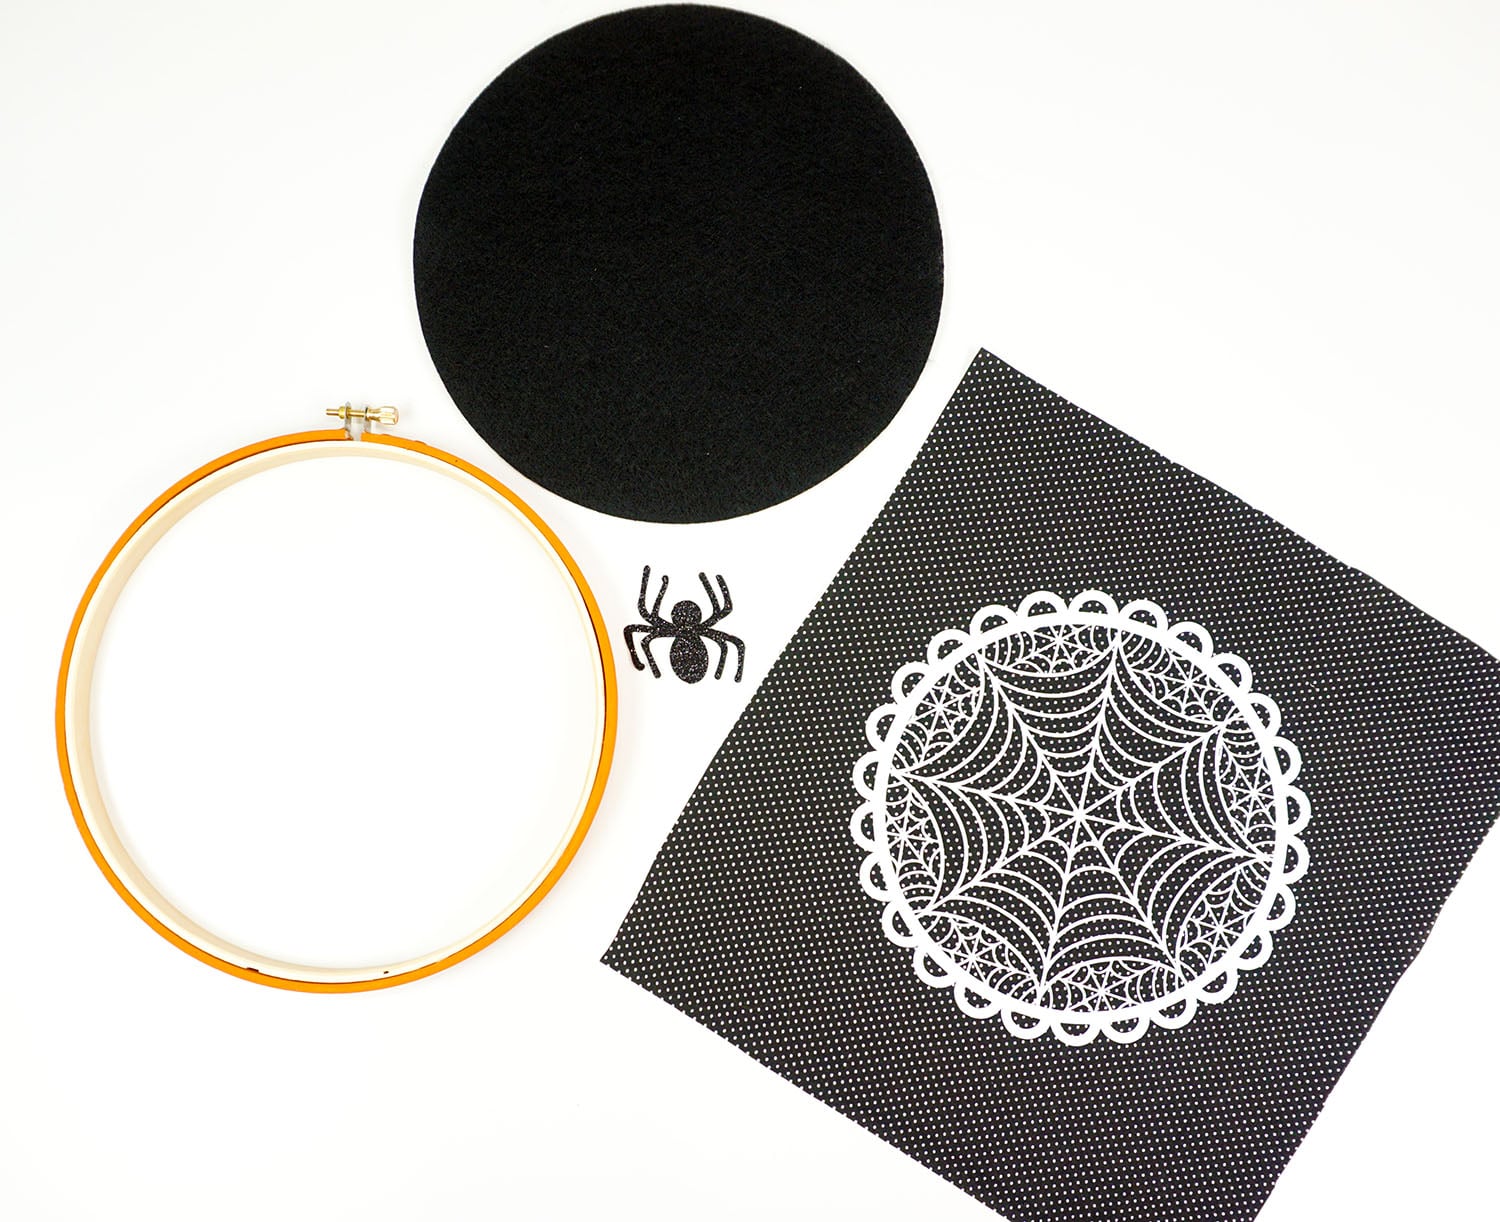 hoop and pieces for spider web art 